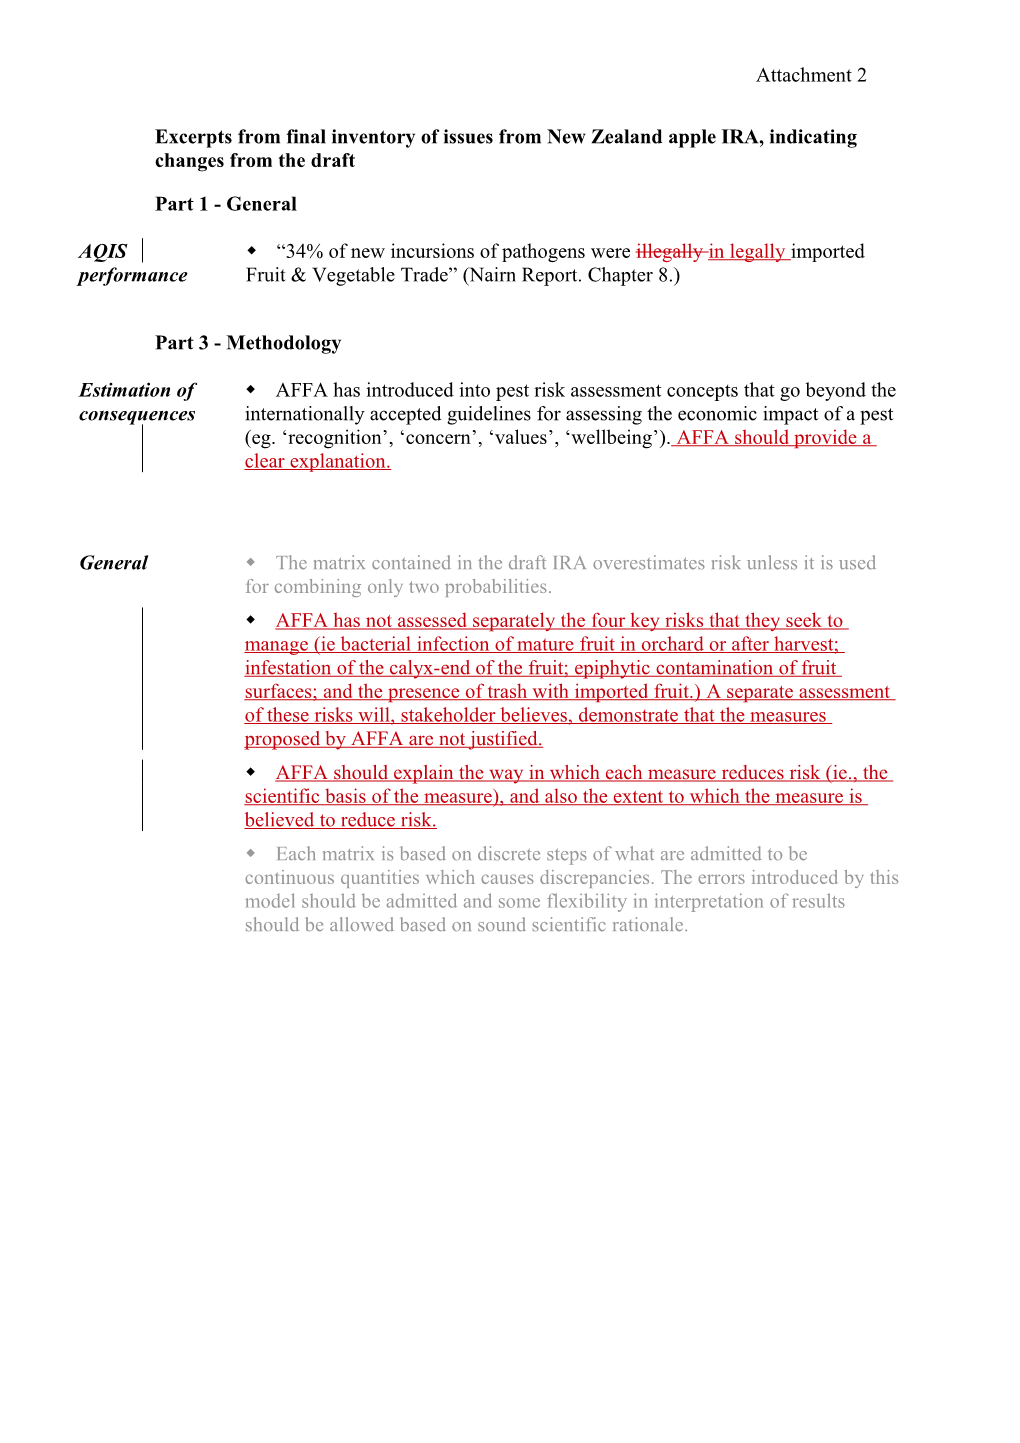 Excerpts from Final Inventory of Issues from New Zealand Apple IRA, Indicating Changes